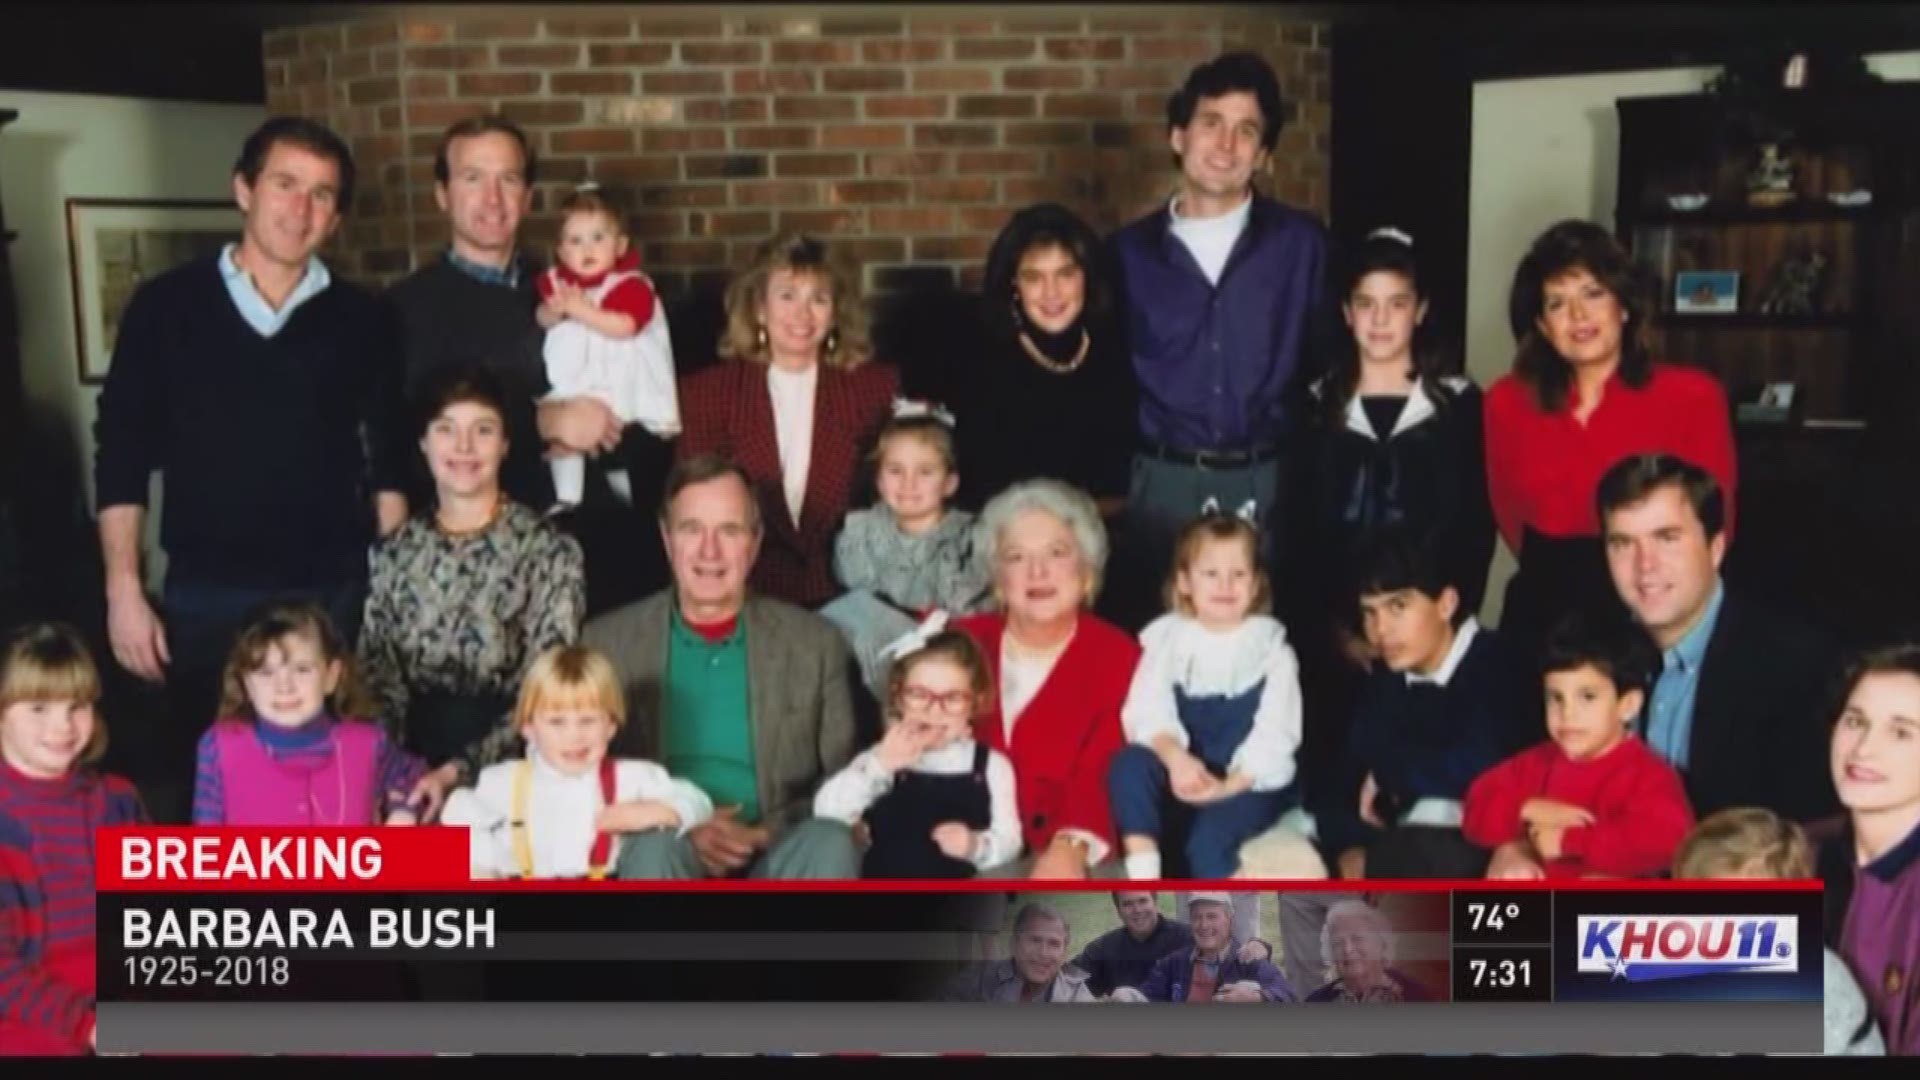 KHOU 11 Special Coverage: Former First Lady Barbara Bush dies at 92